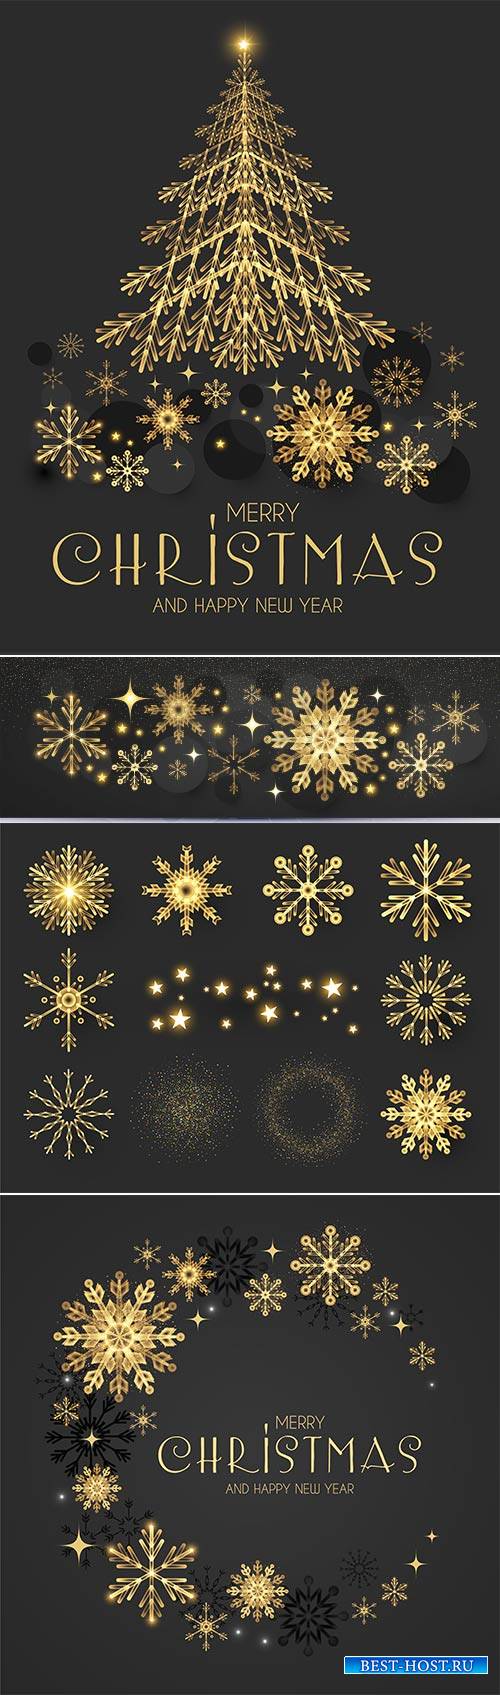 Christmas vector illustration with golden snowflakes